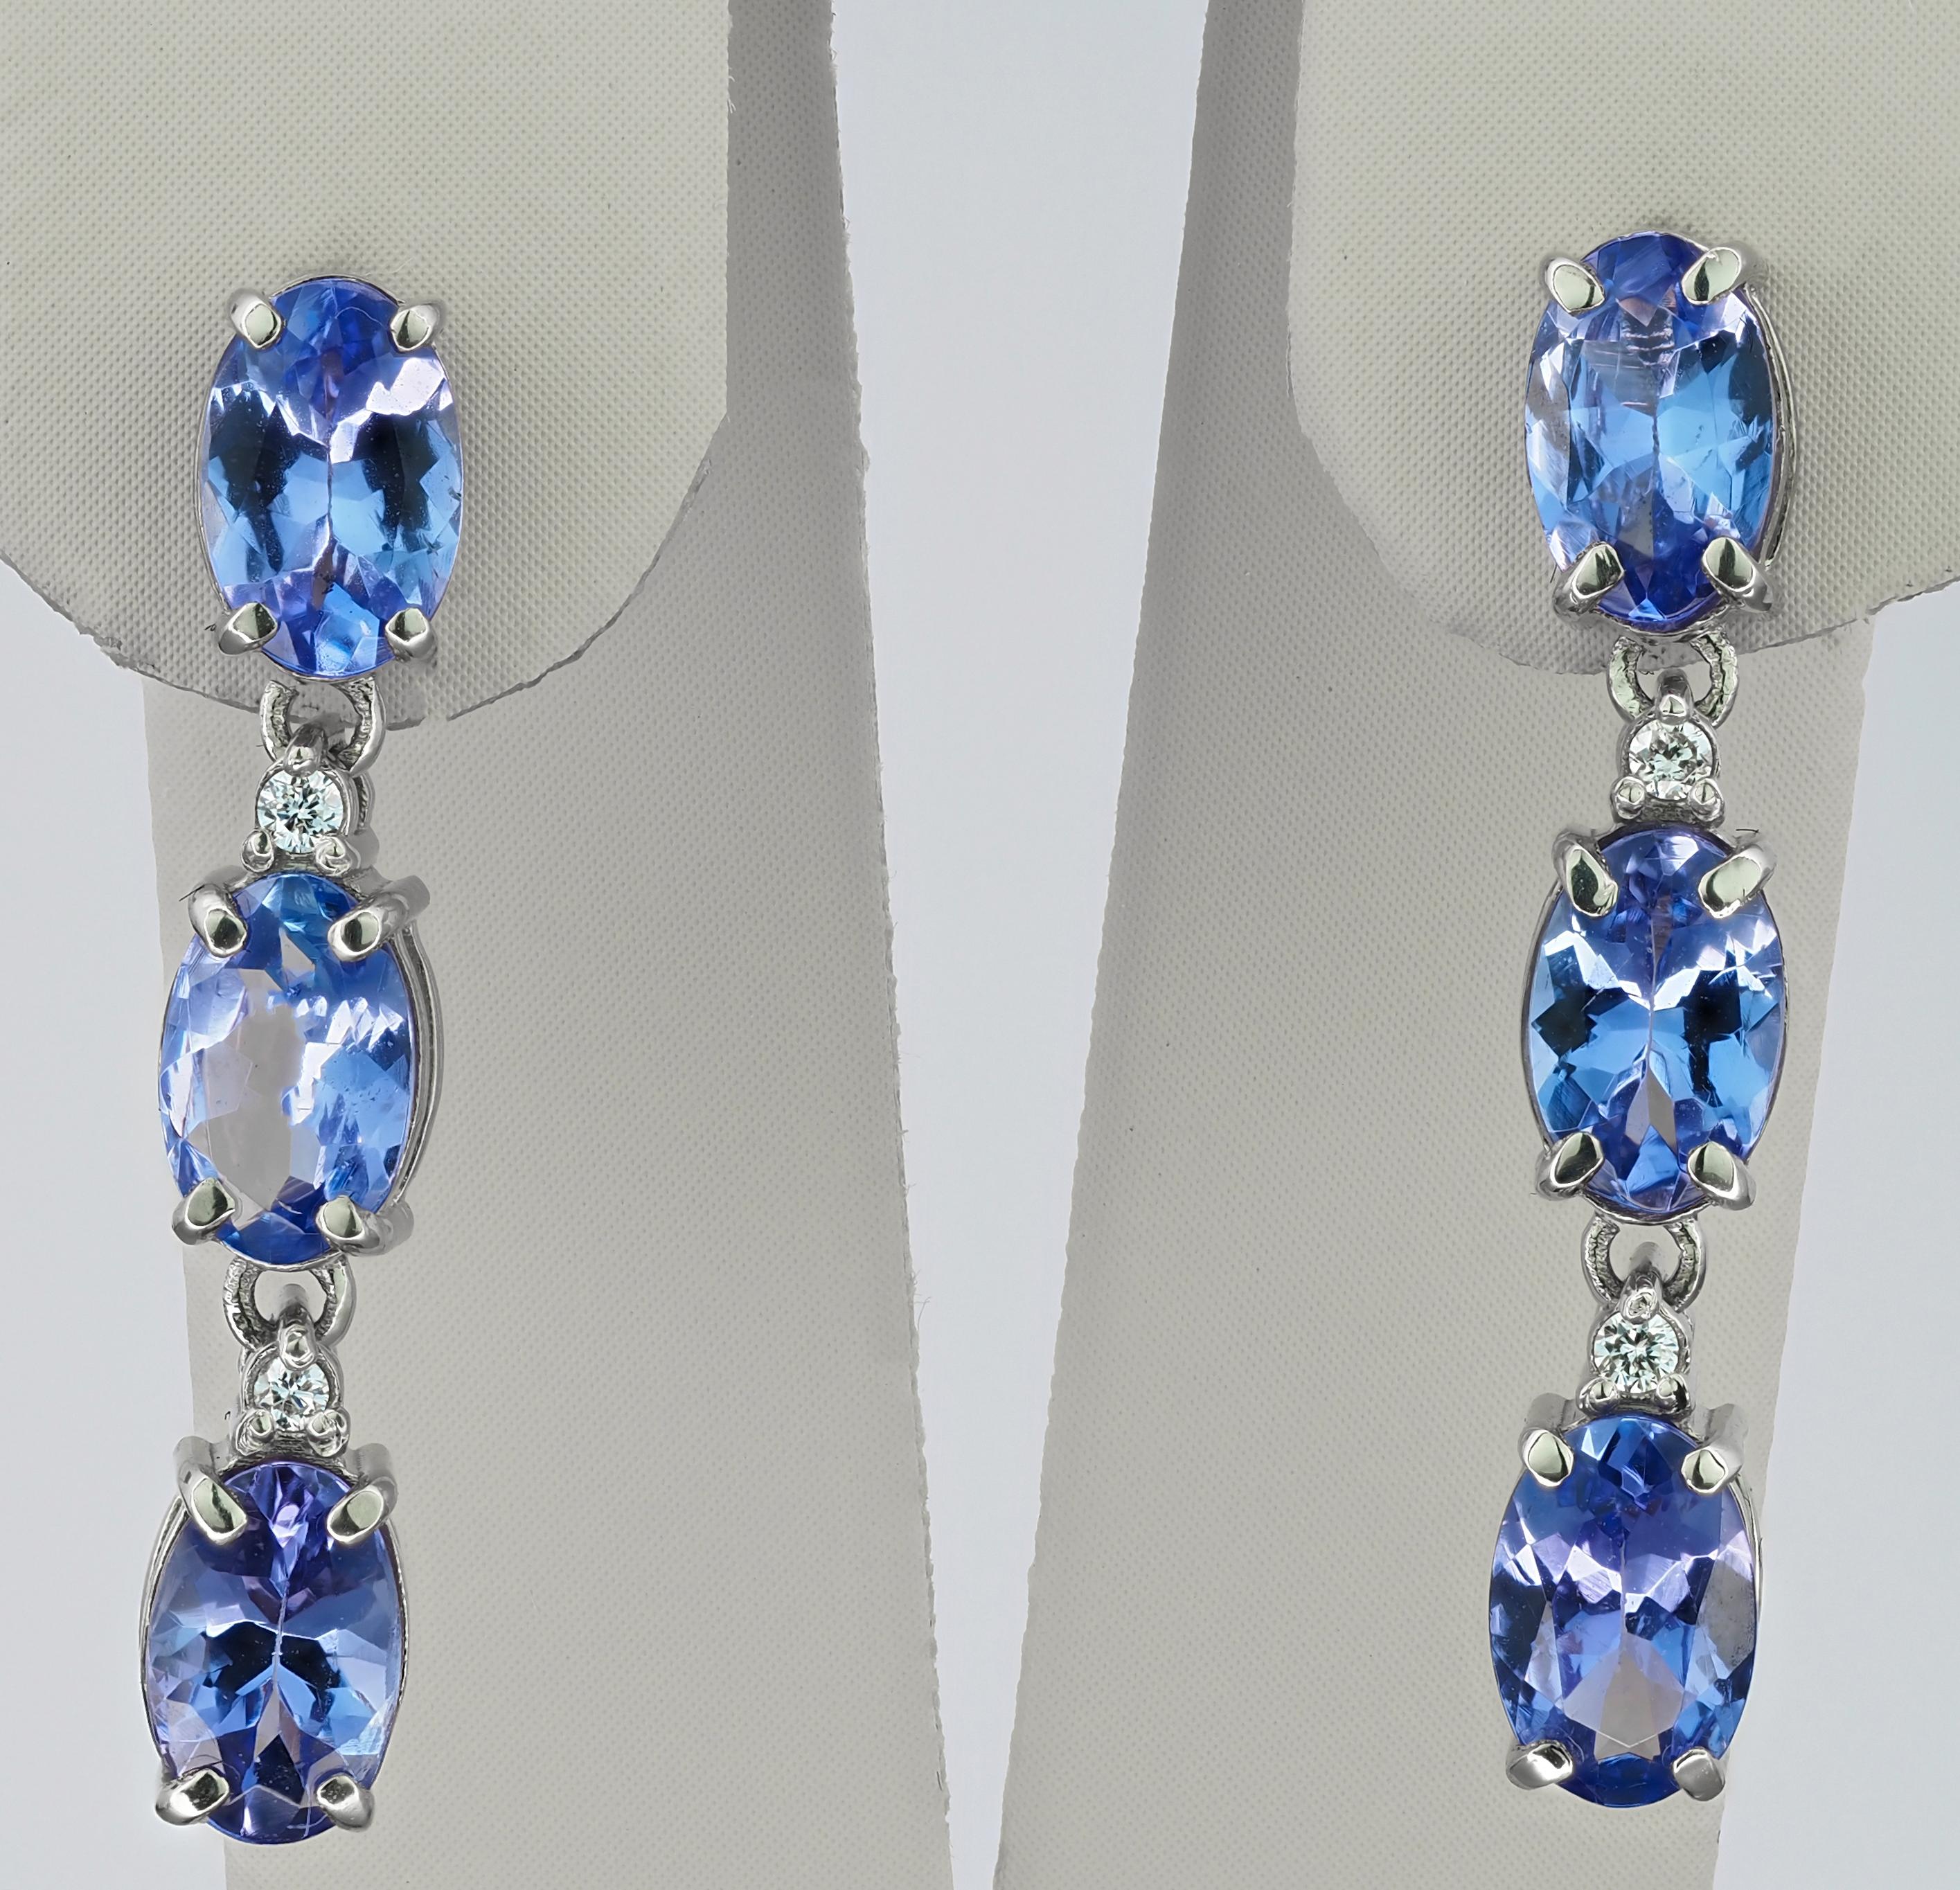 14 karat solid gold earrings with central genuine tanzanite and diamonds. December birthstone.
Weight: 2.5 g.
Size: 23 x 4.5 mm.

Gemstones: Natural tanzanites - 6 pieces
Weight: approx 4.00 ct in total, oval cut, color - blue light
Clarity: